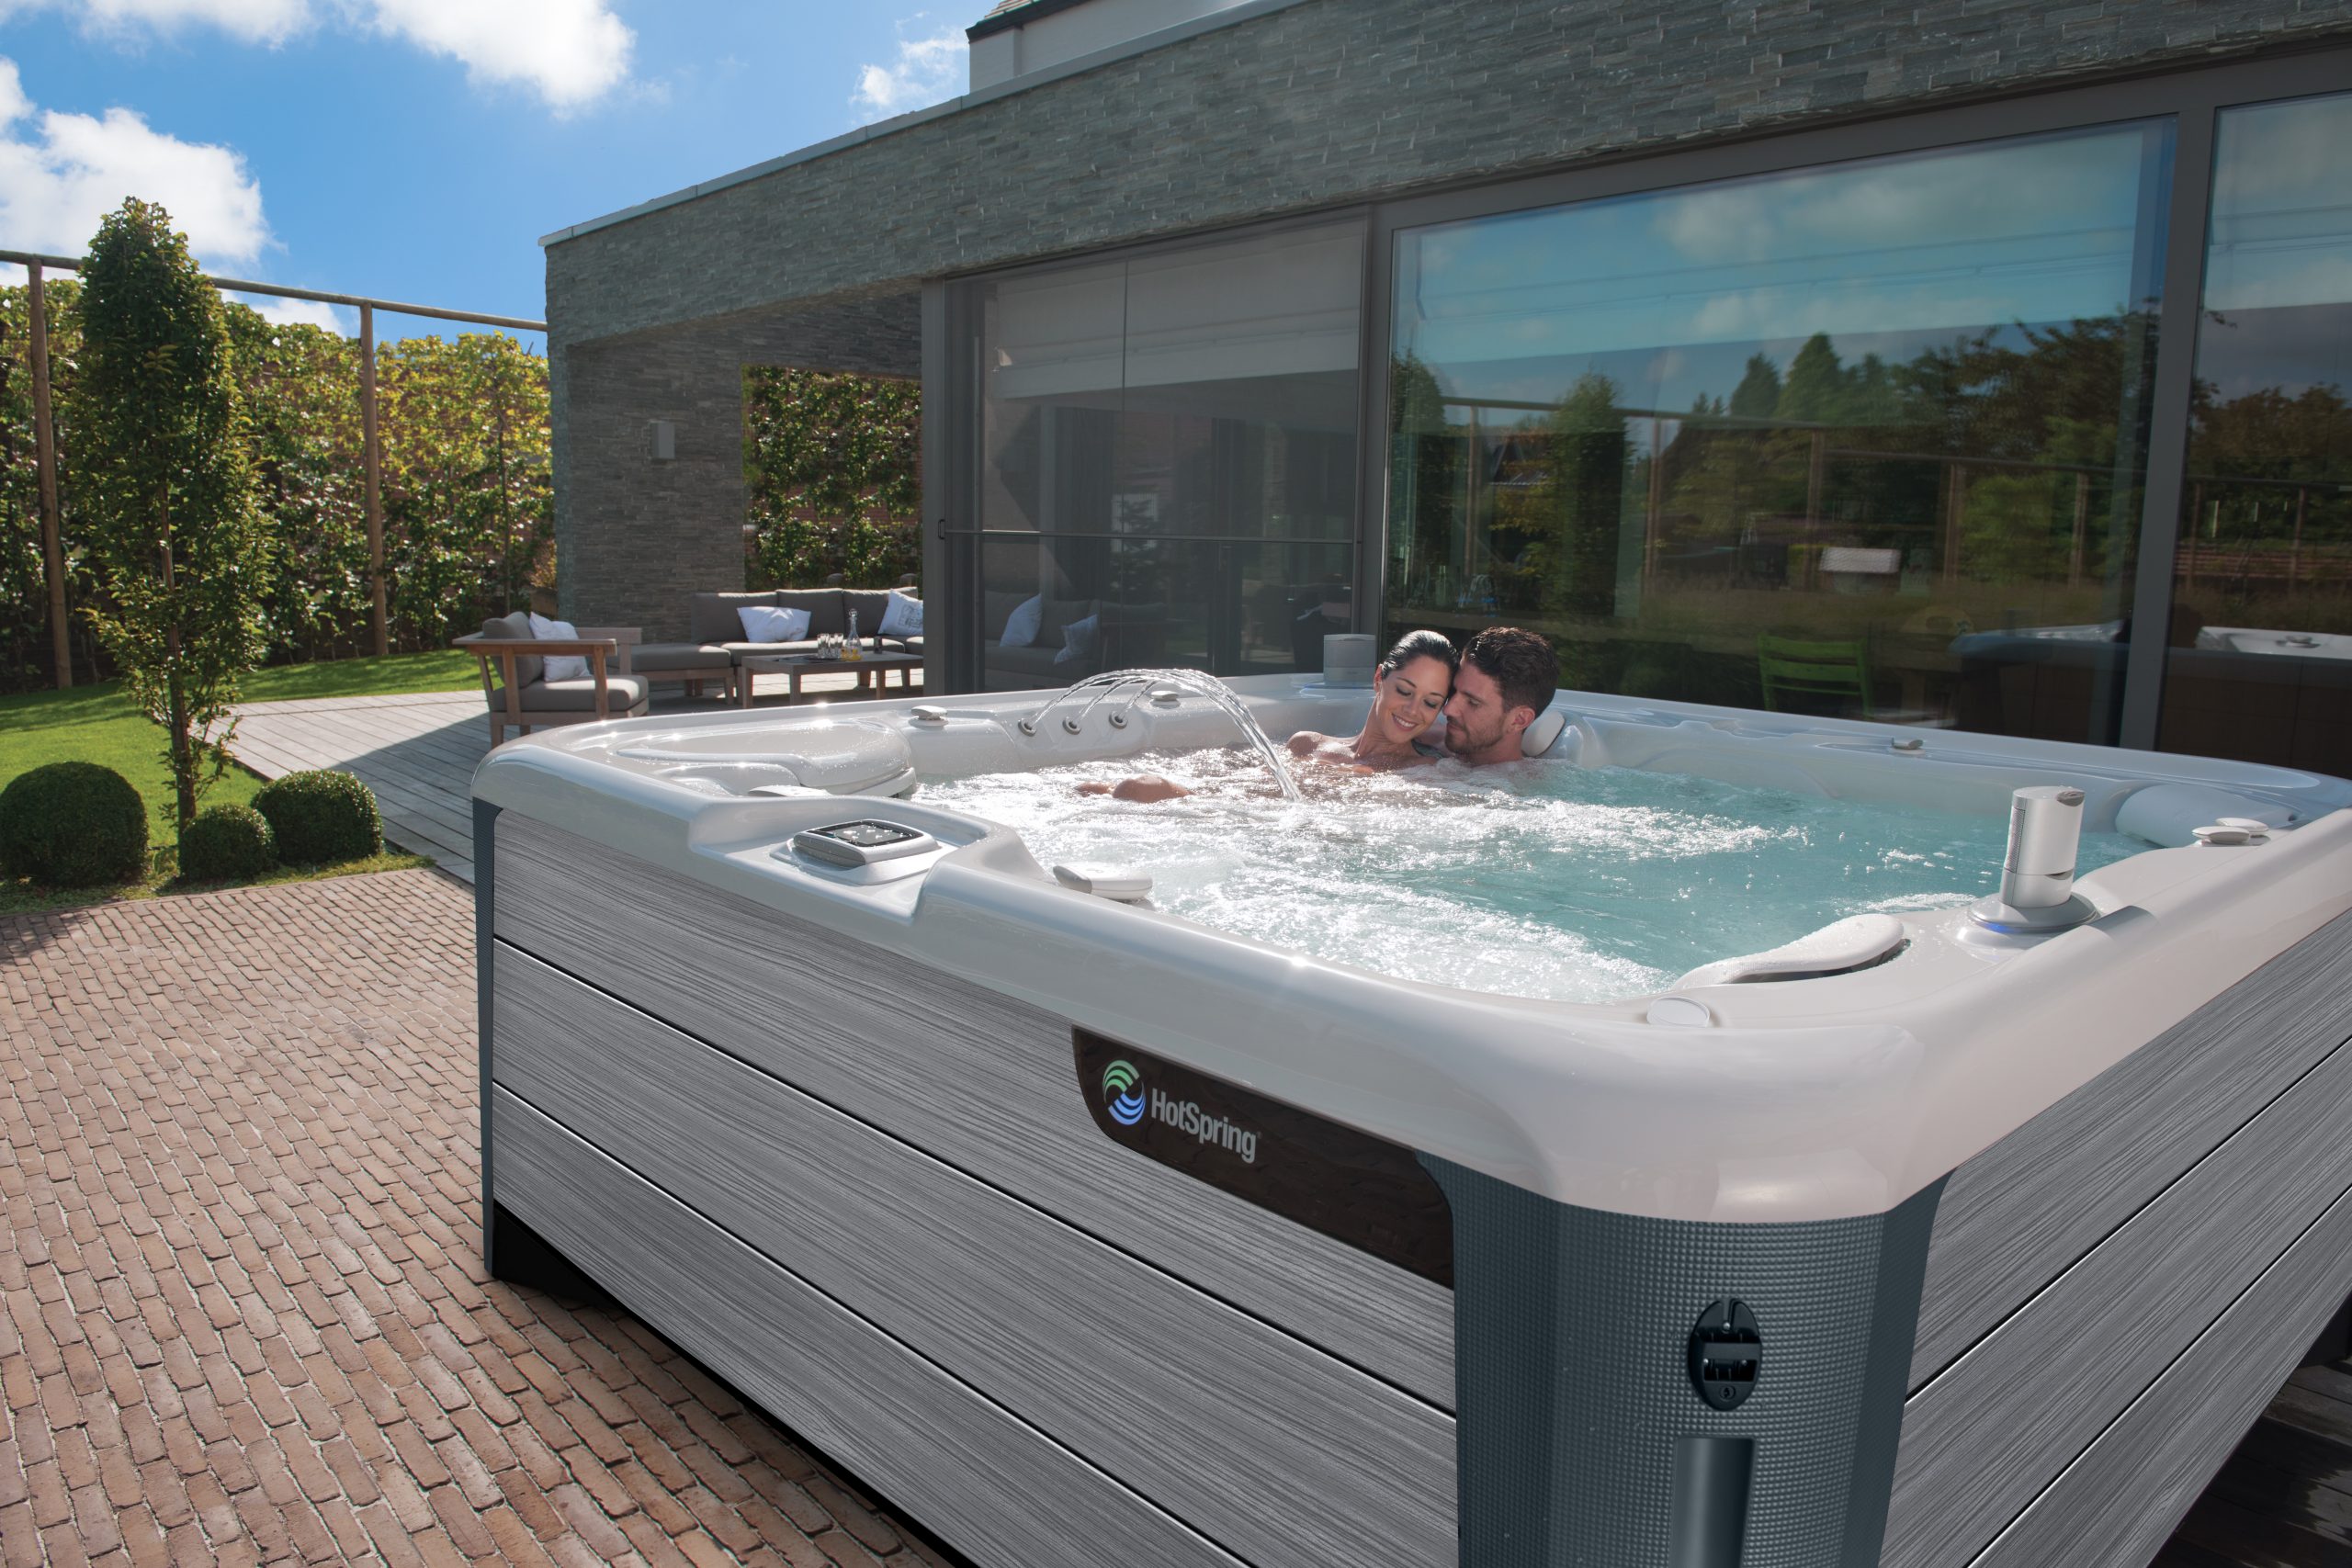 5 Reasons To Love A Two-Person Hot Tub